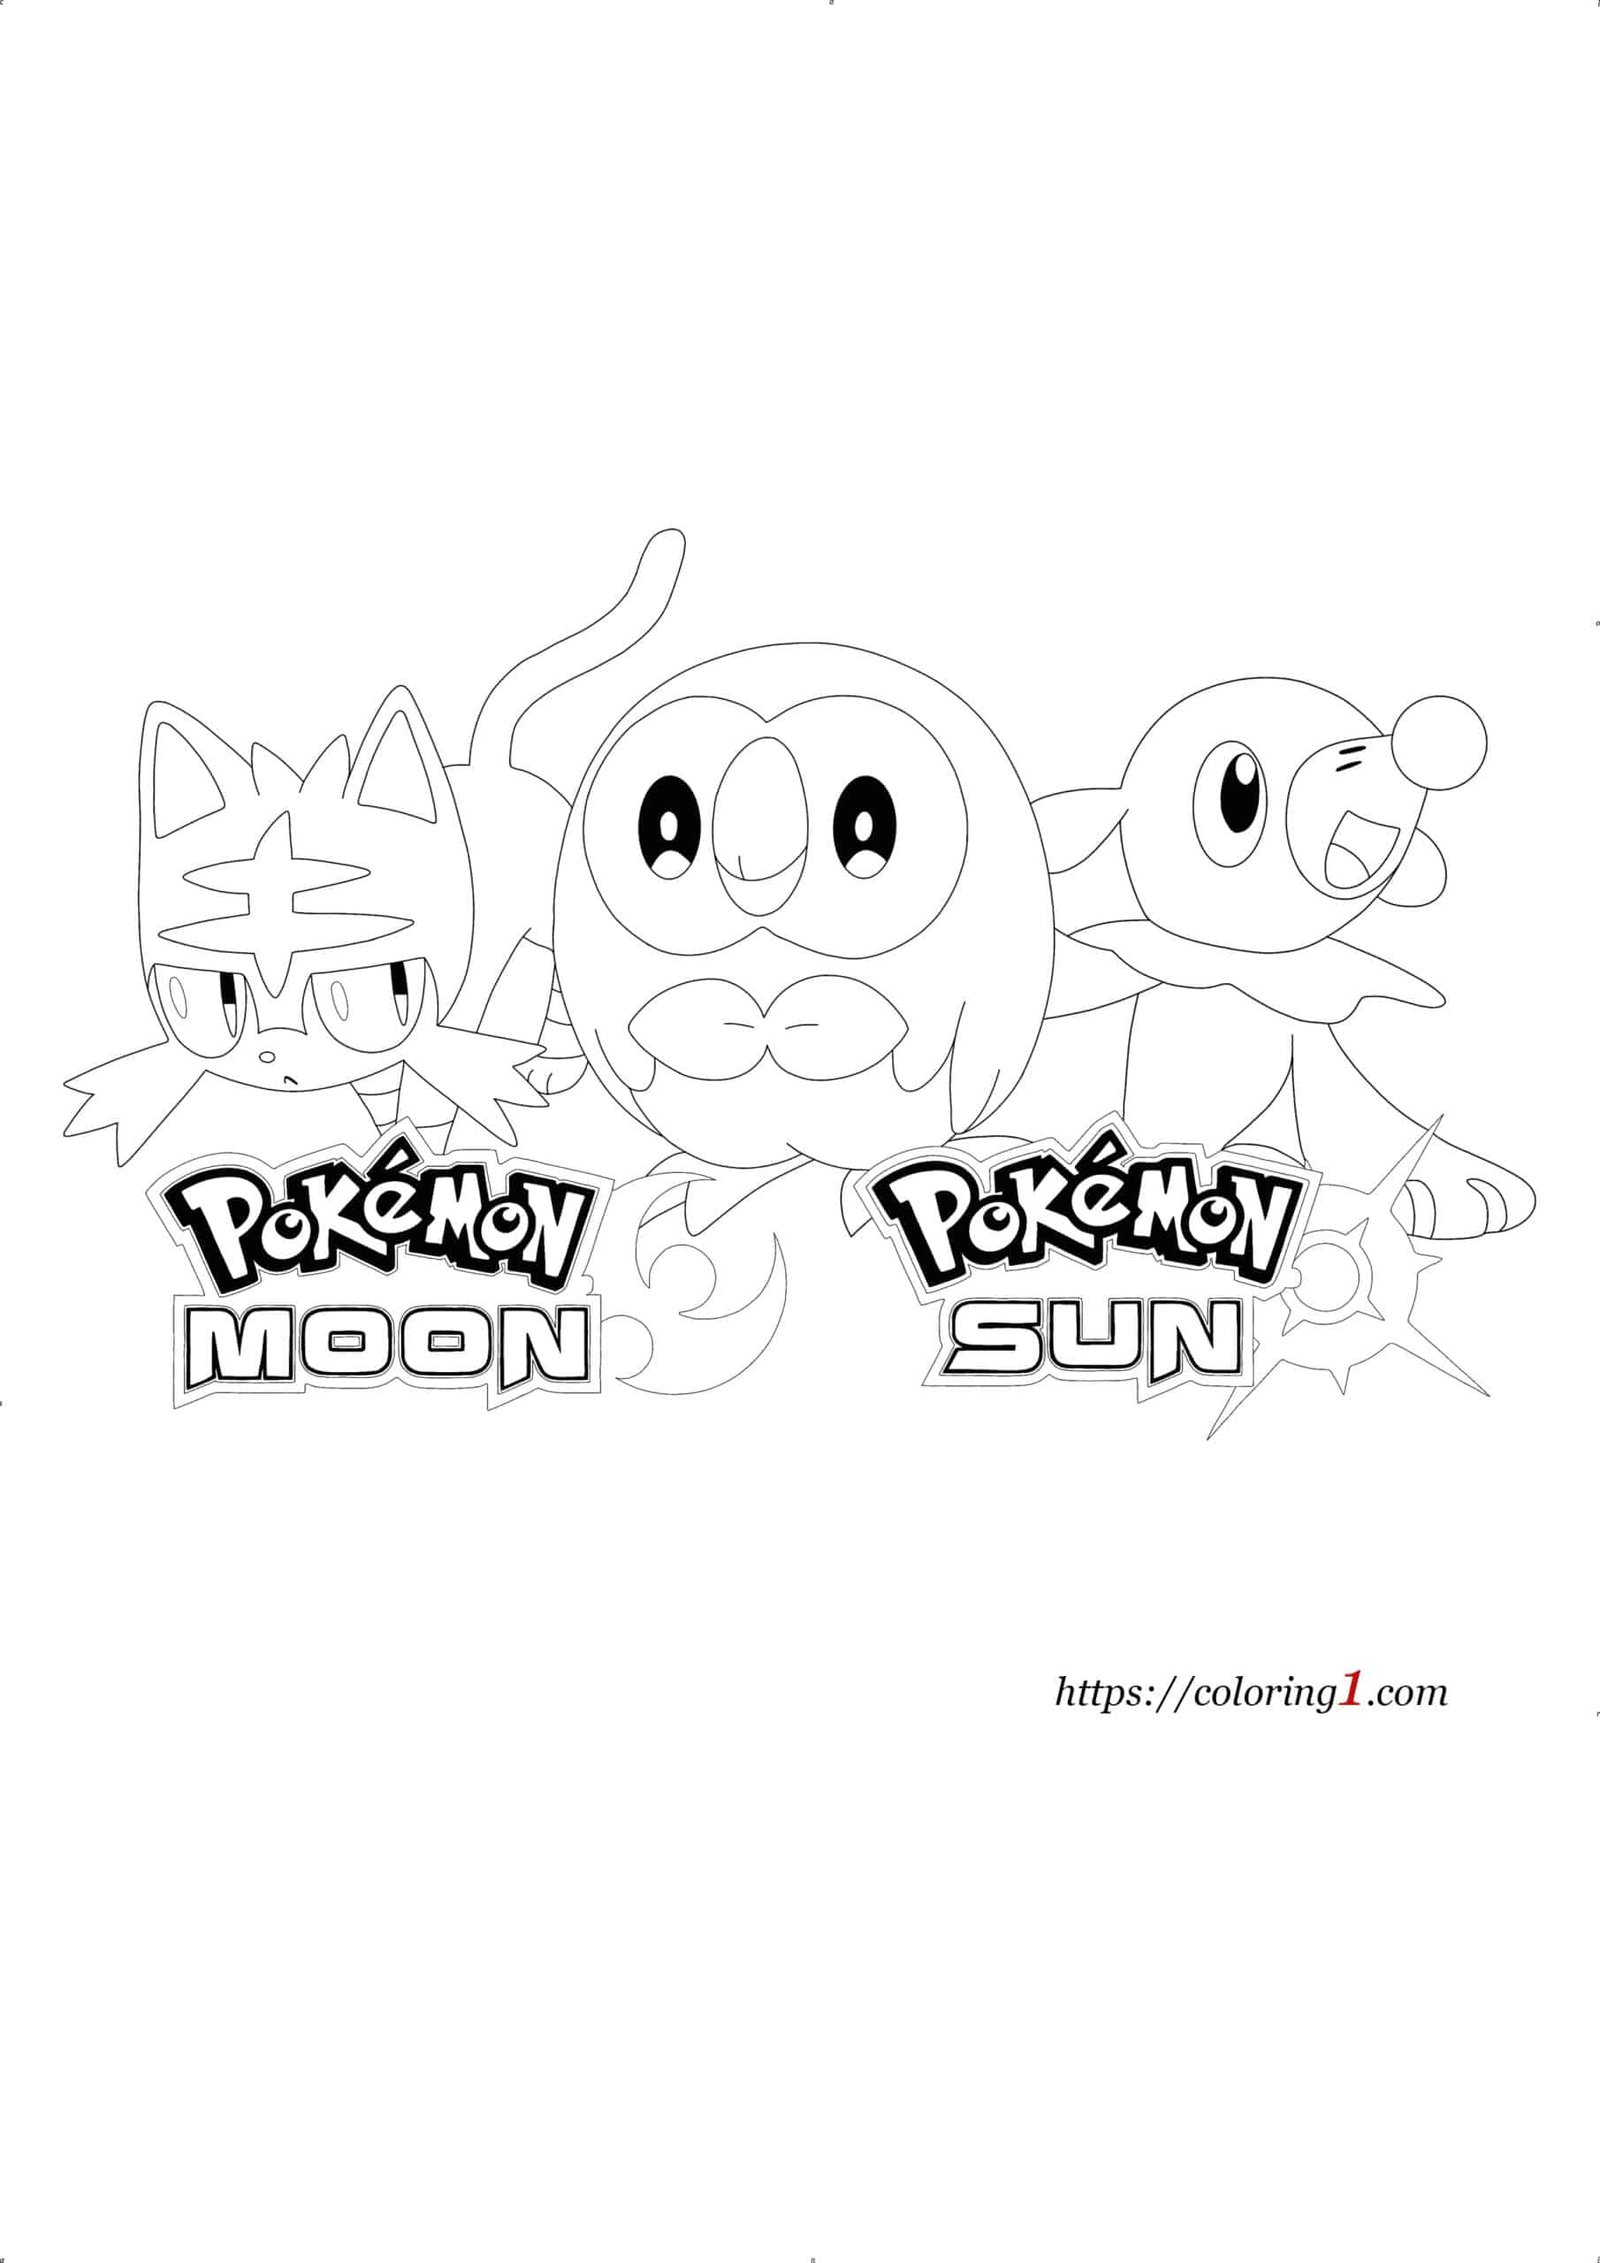 Pokemon sun and moon coloring pages